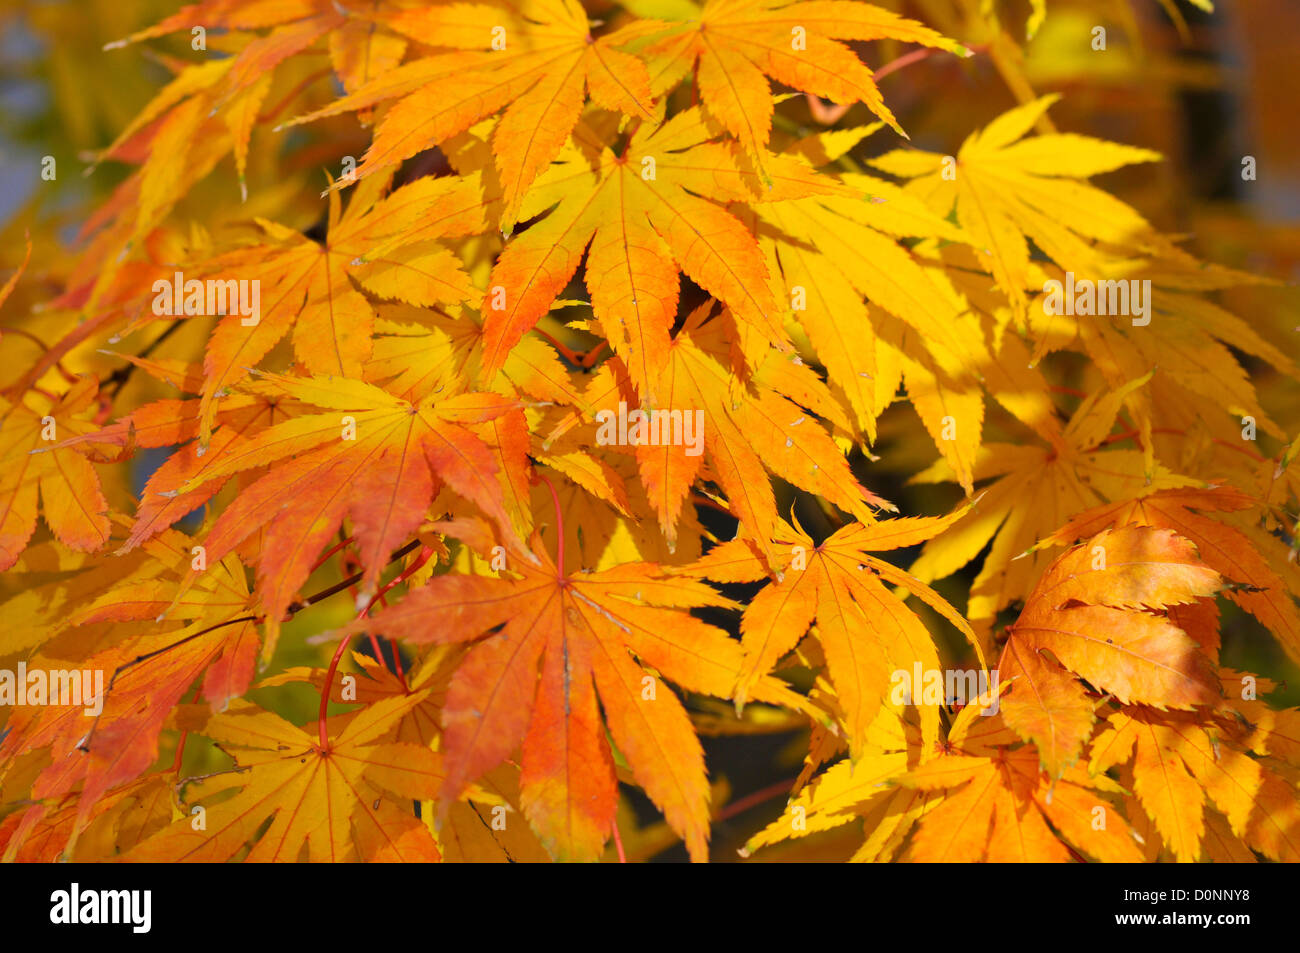 Maple leaves in yellow autumn color, close-up, Nagano, Japan Stock Photo